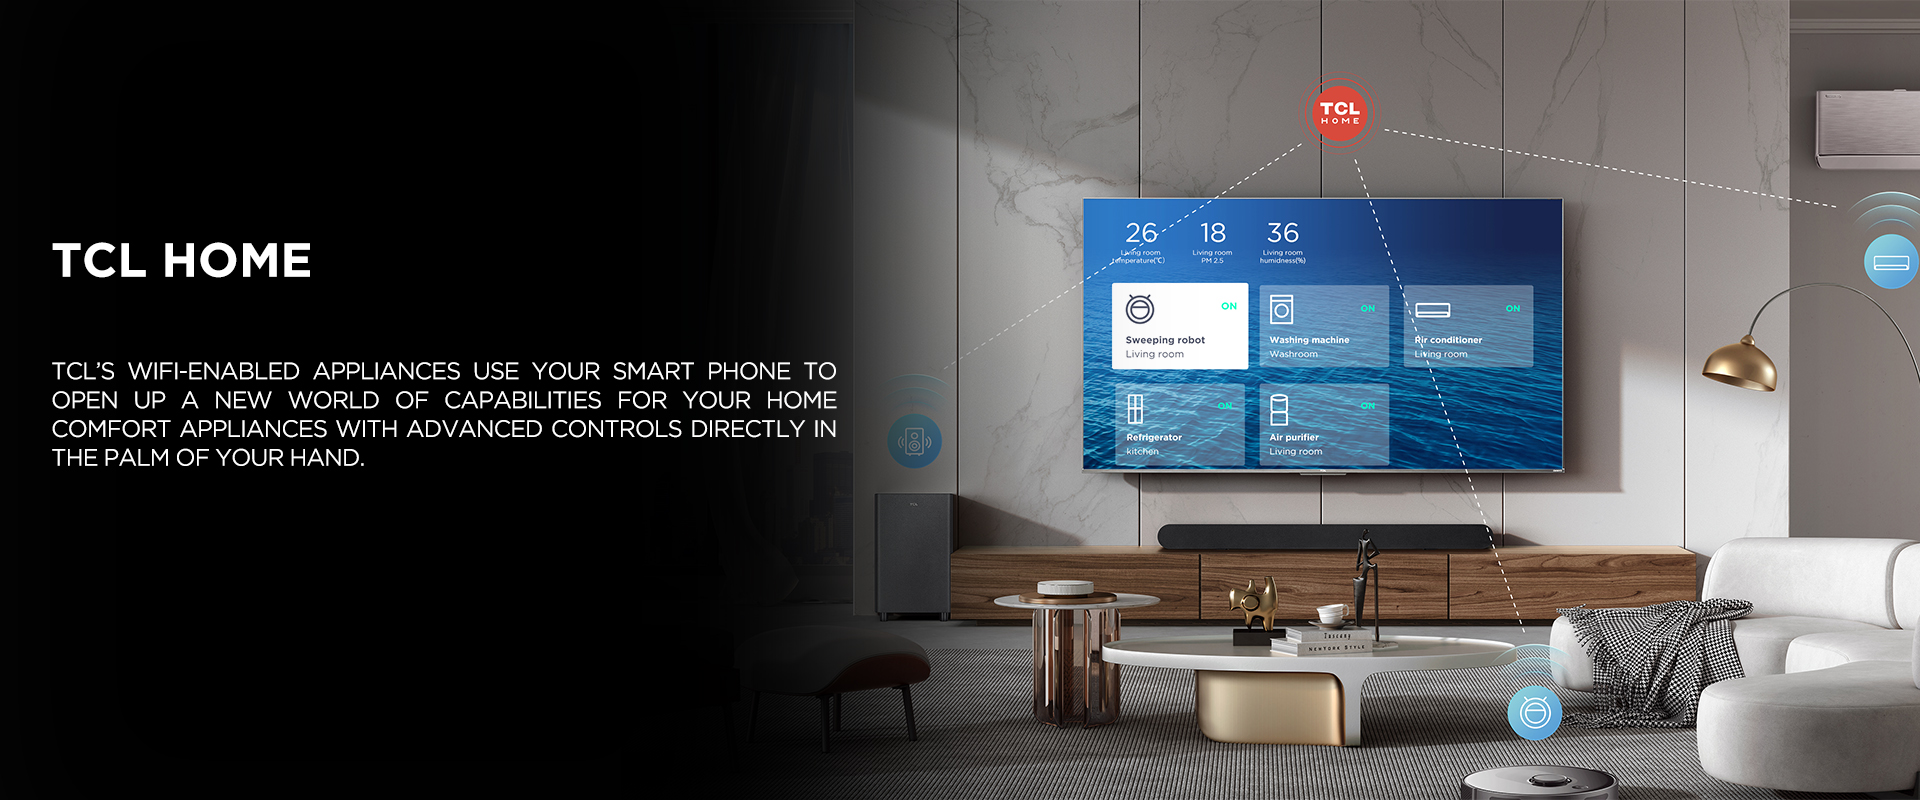 TCL HOME - TCL’???s WiFi-enabled appliances use your smart phone to open up a new world of capabilities for your home comfort appliances with advanced controls directly in the palm of your hand.